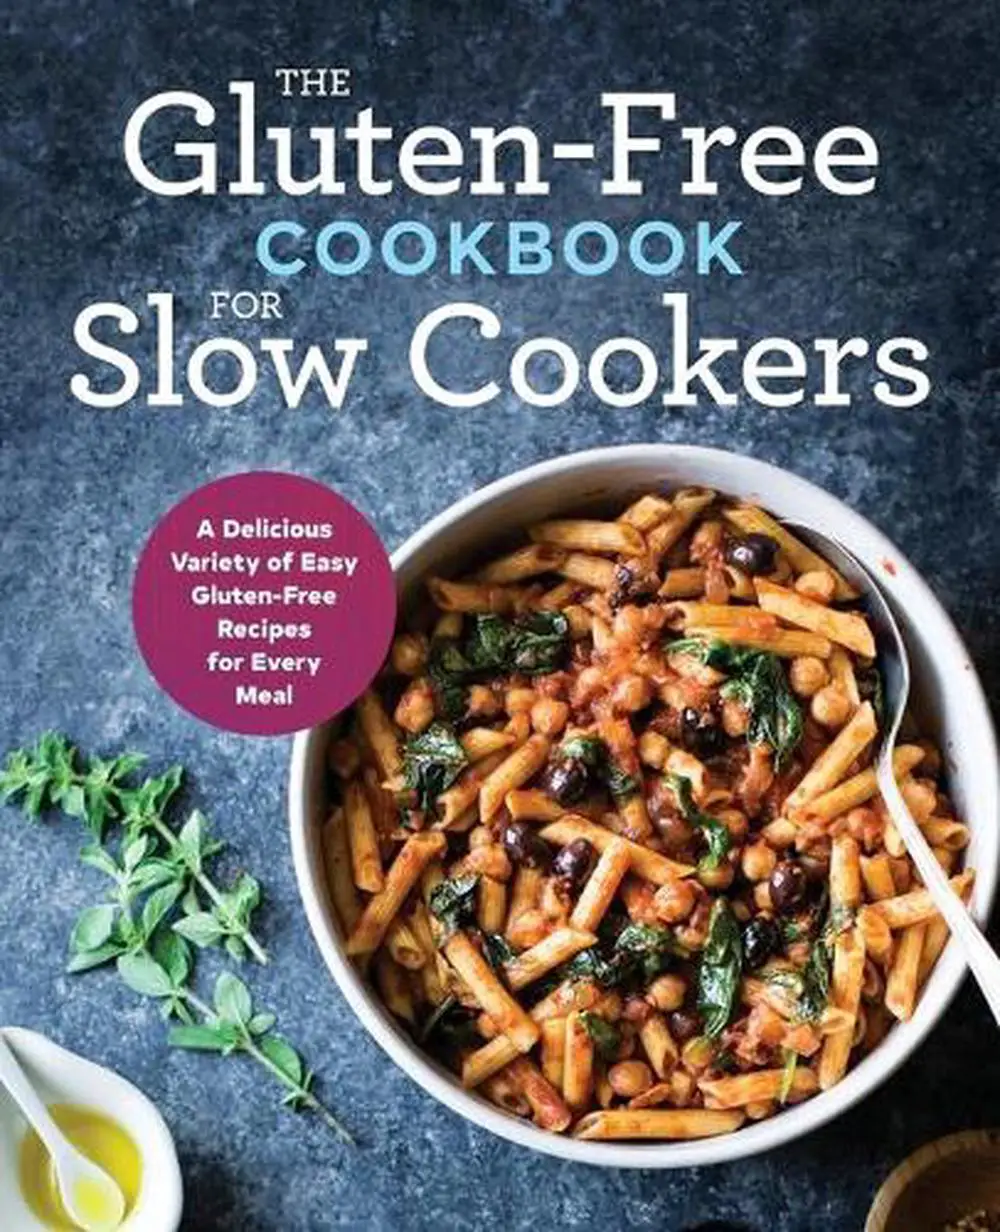 Gluten Free Cookbook: The Gluten Free Cookbook for Slow Cookers